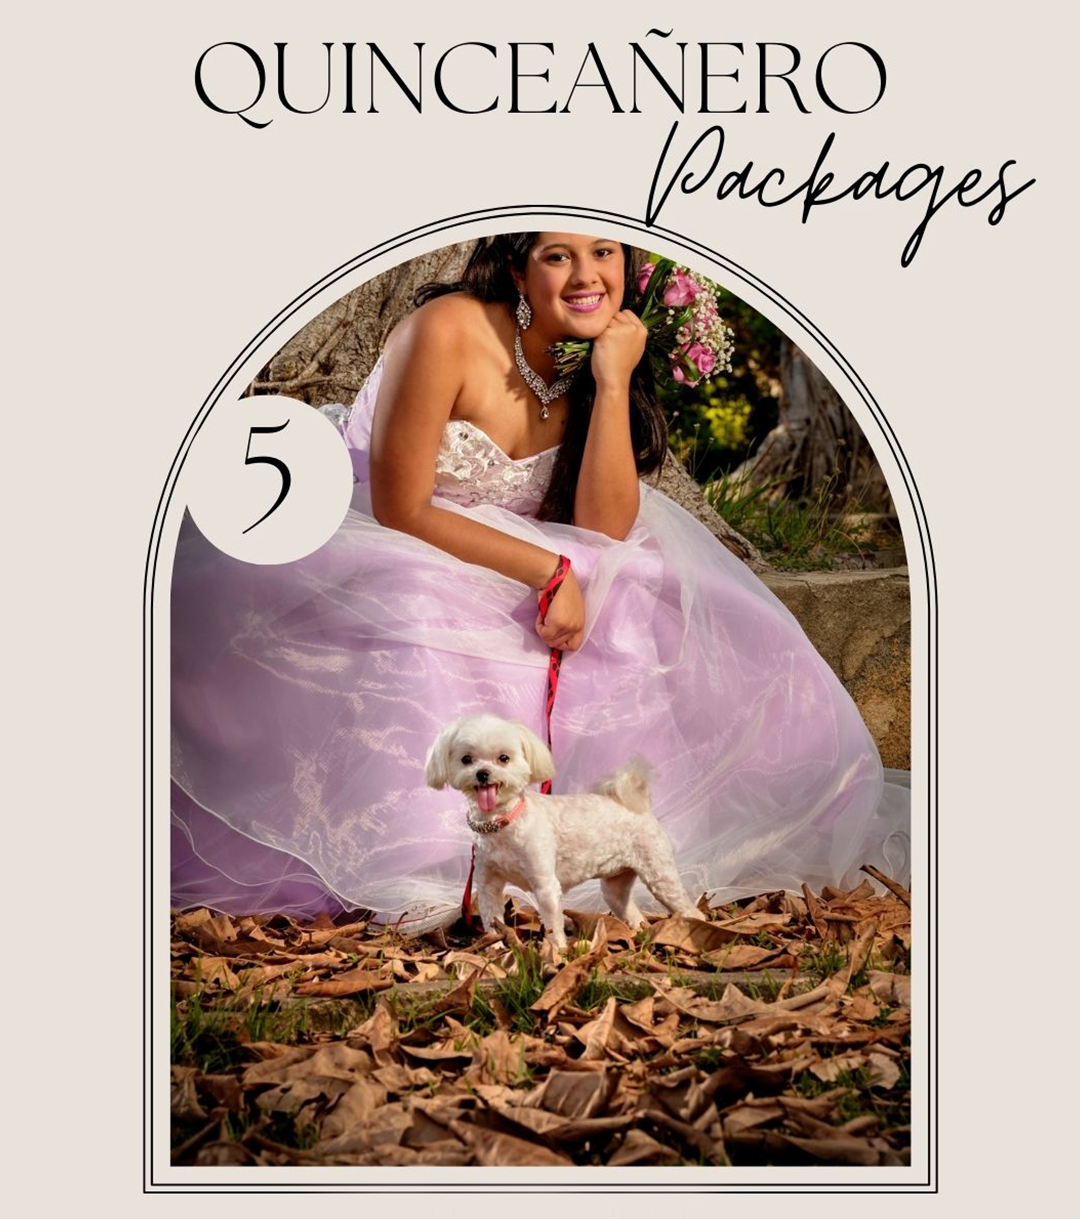 Quinceañera photography package